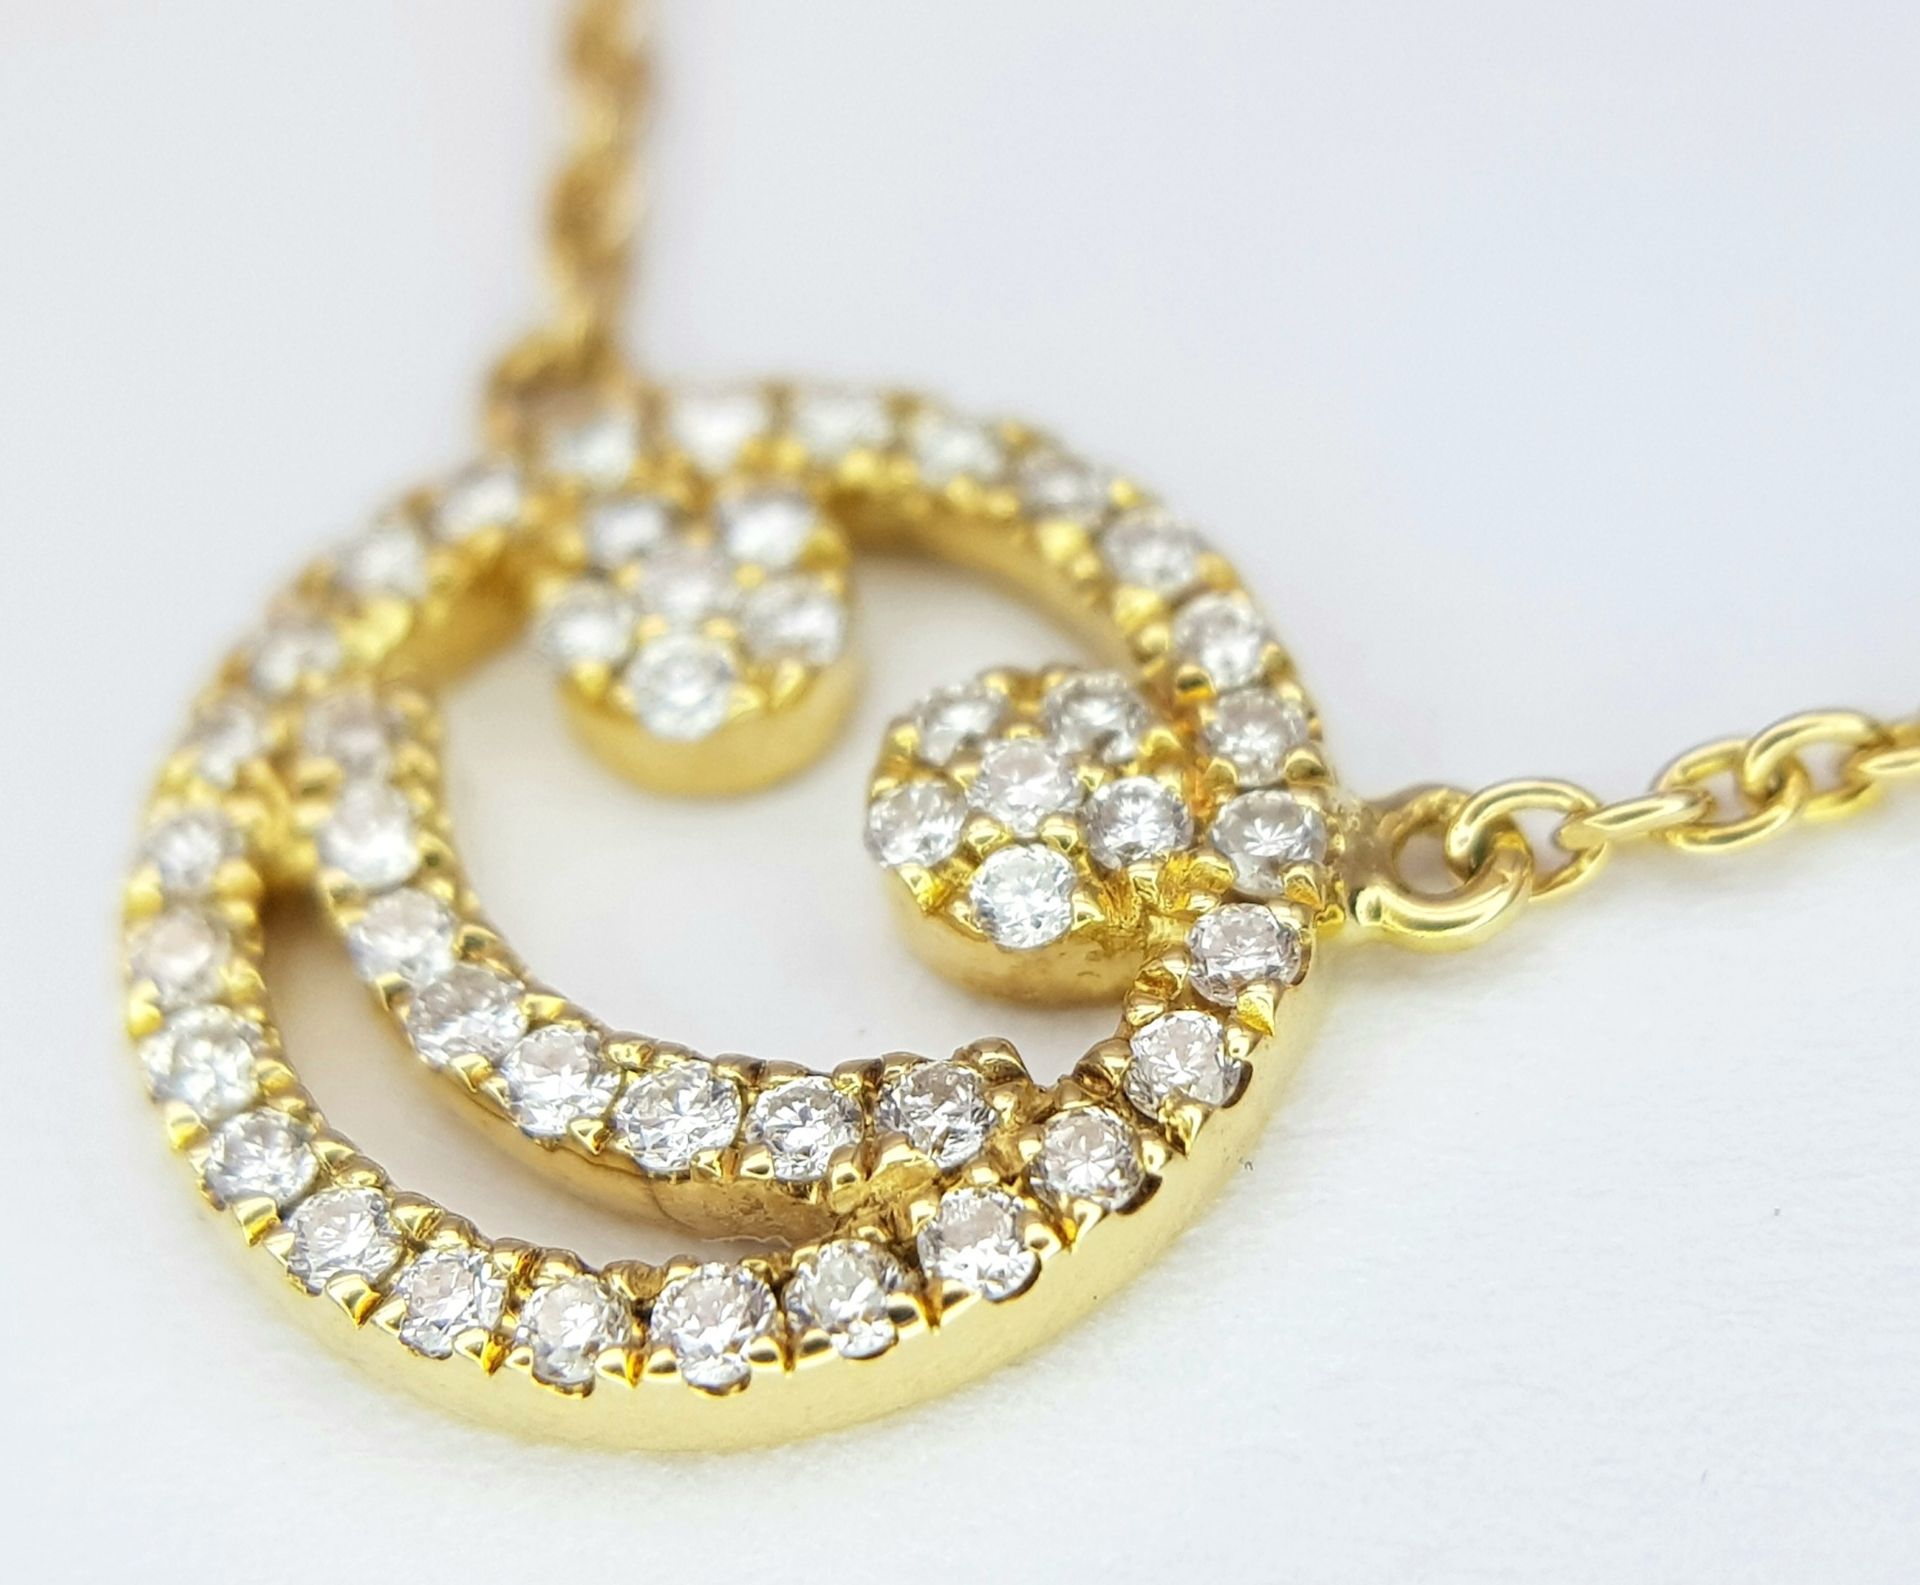 An 18K Gold Diamond Smiley Face Pendant on an 18K Yellow Gold Disappearing Necklace. 1cm diameter - Image 5 of 7